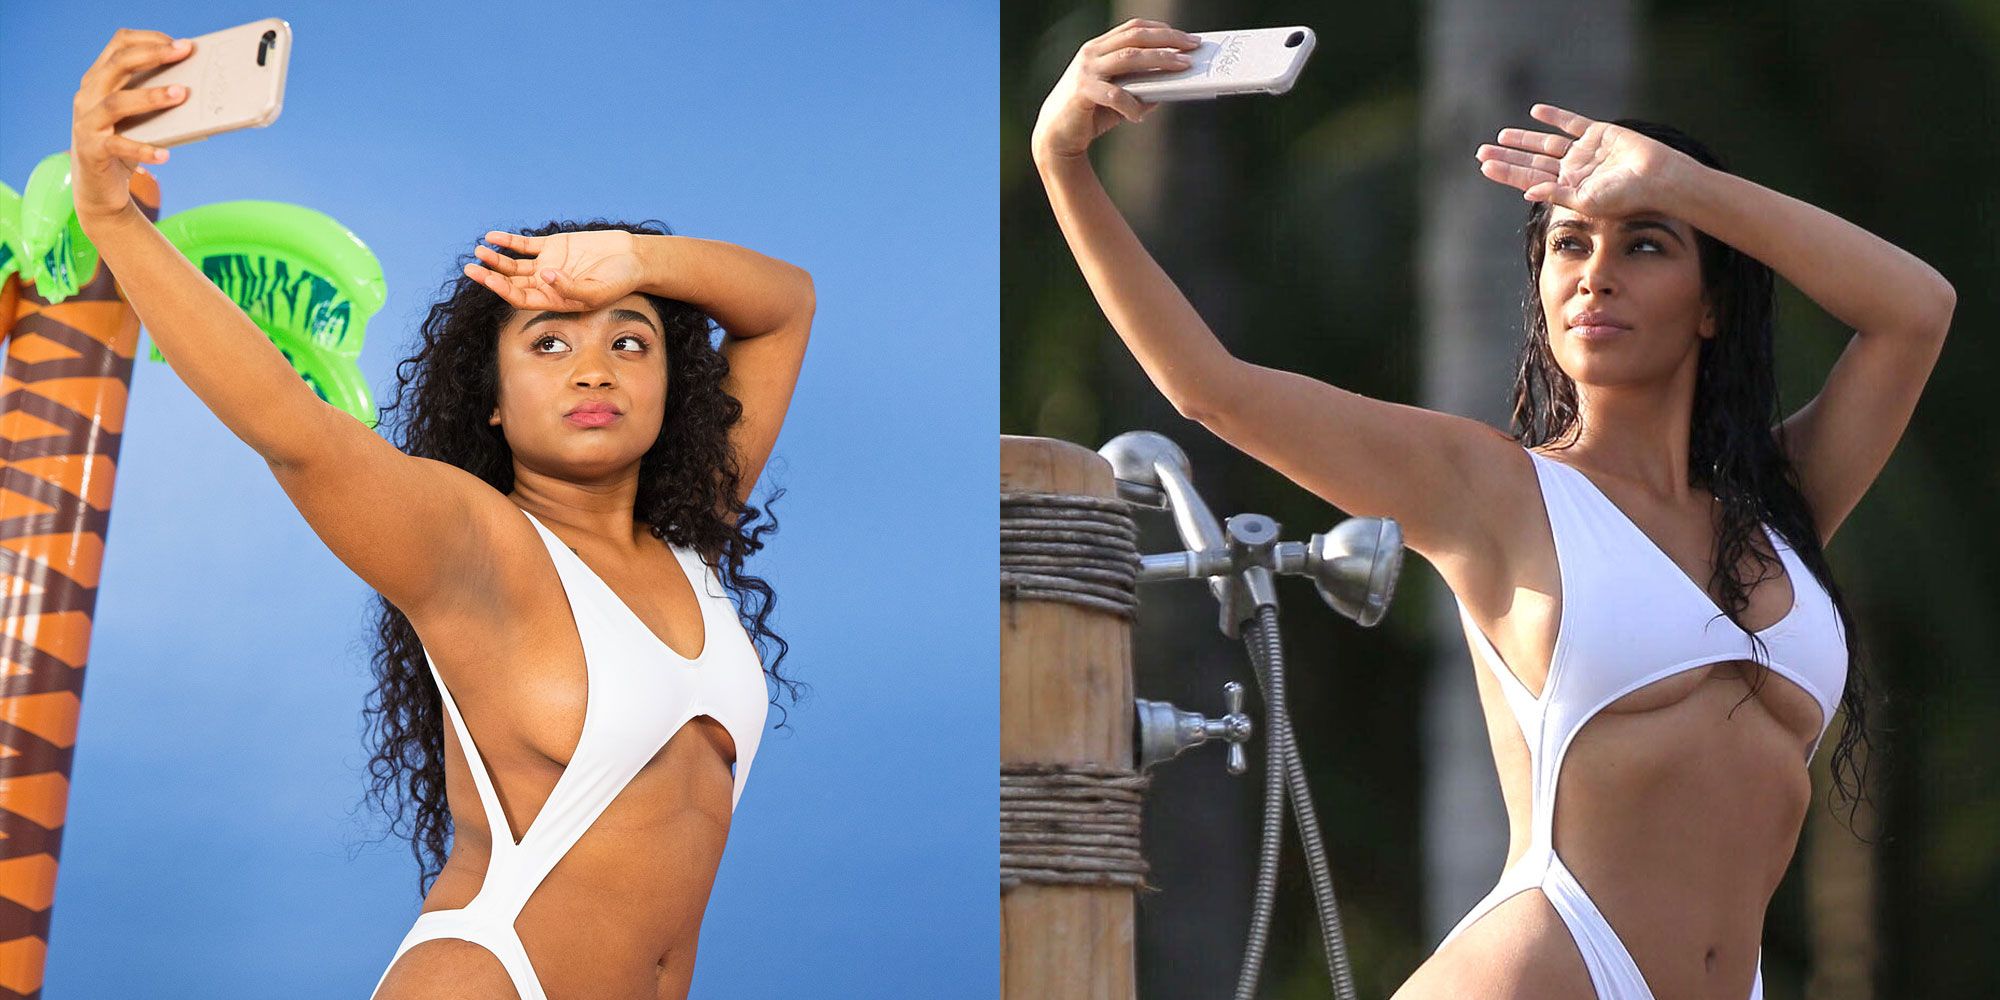 Photos of 5 Real Women In Outrageous Swimsuits